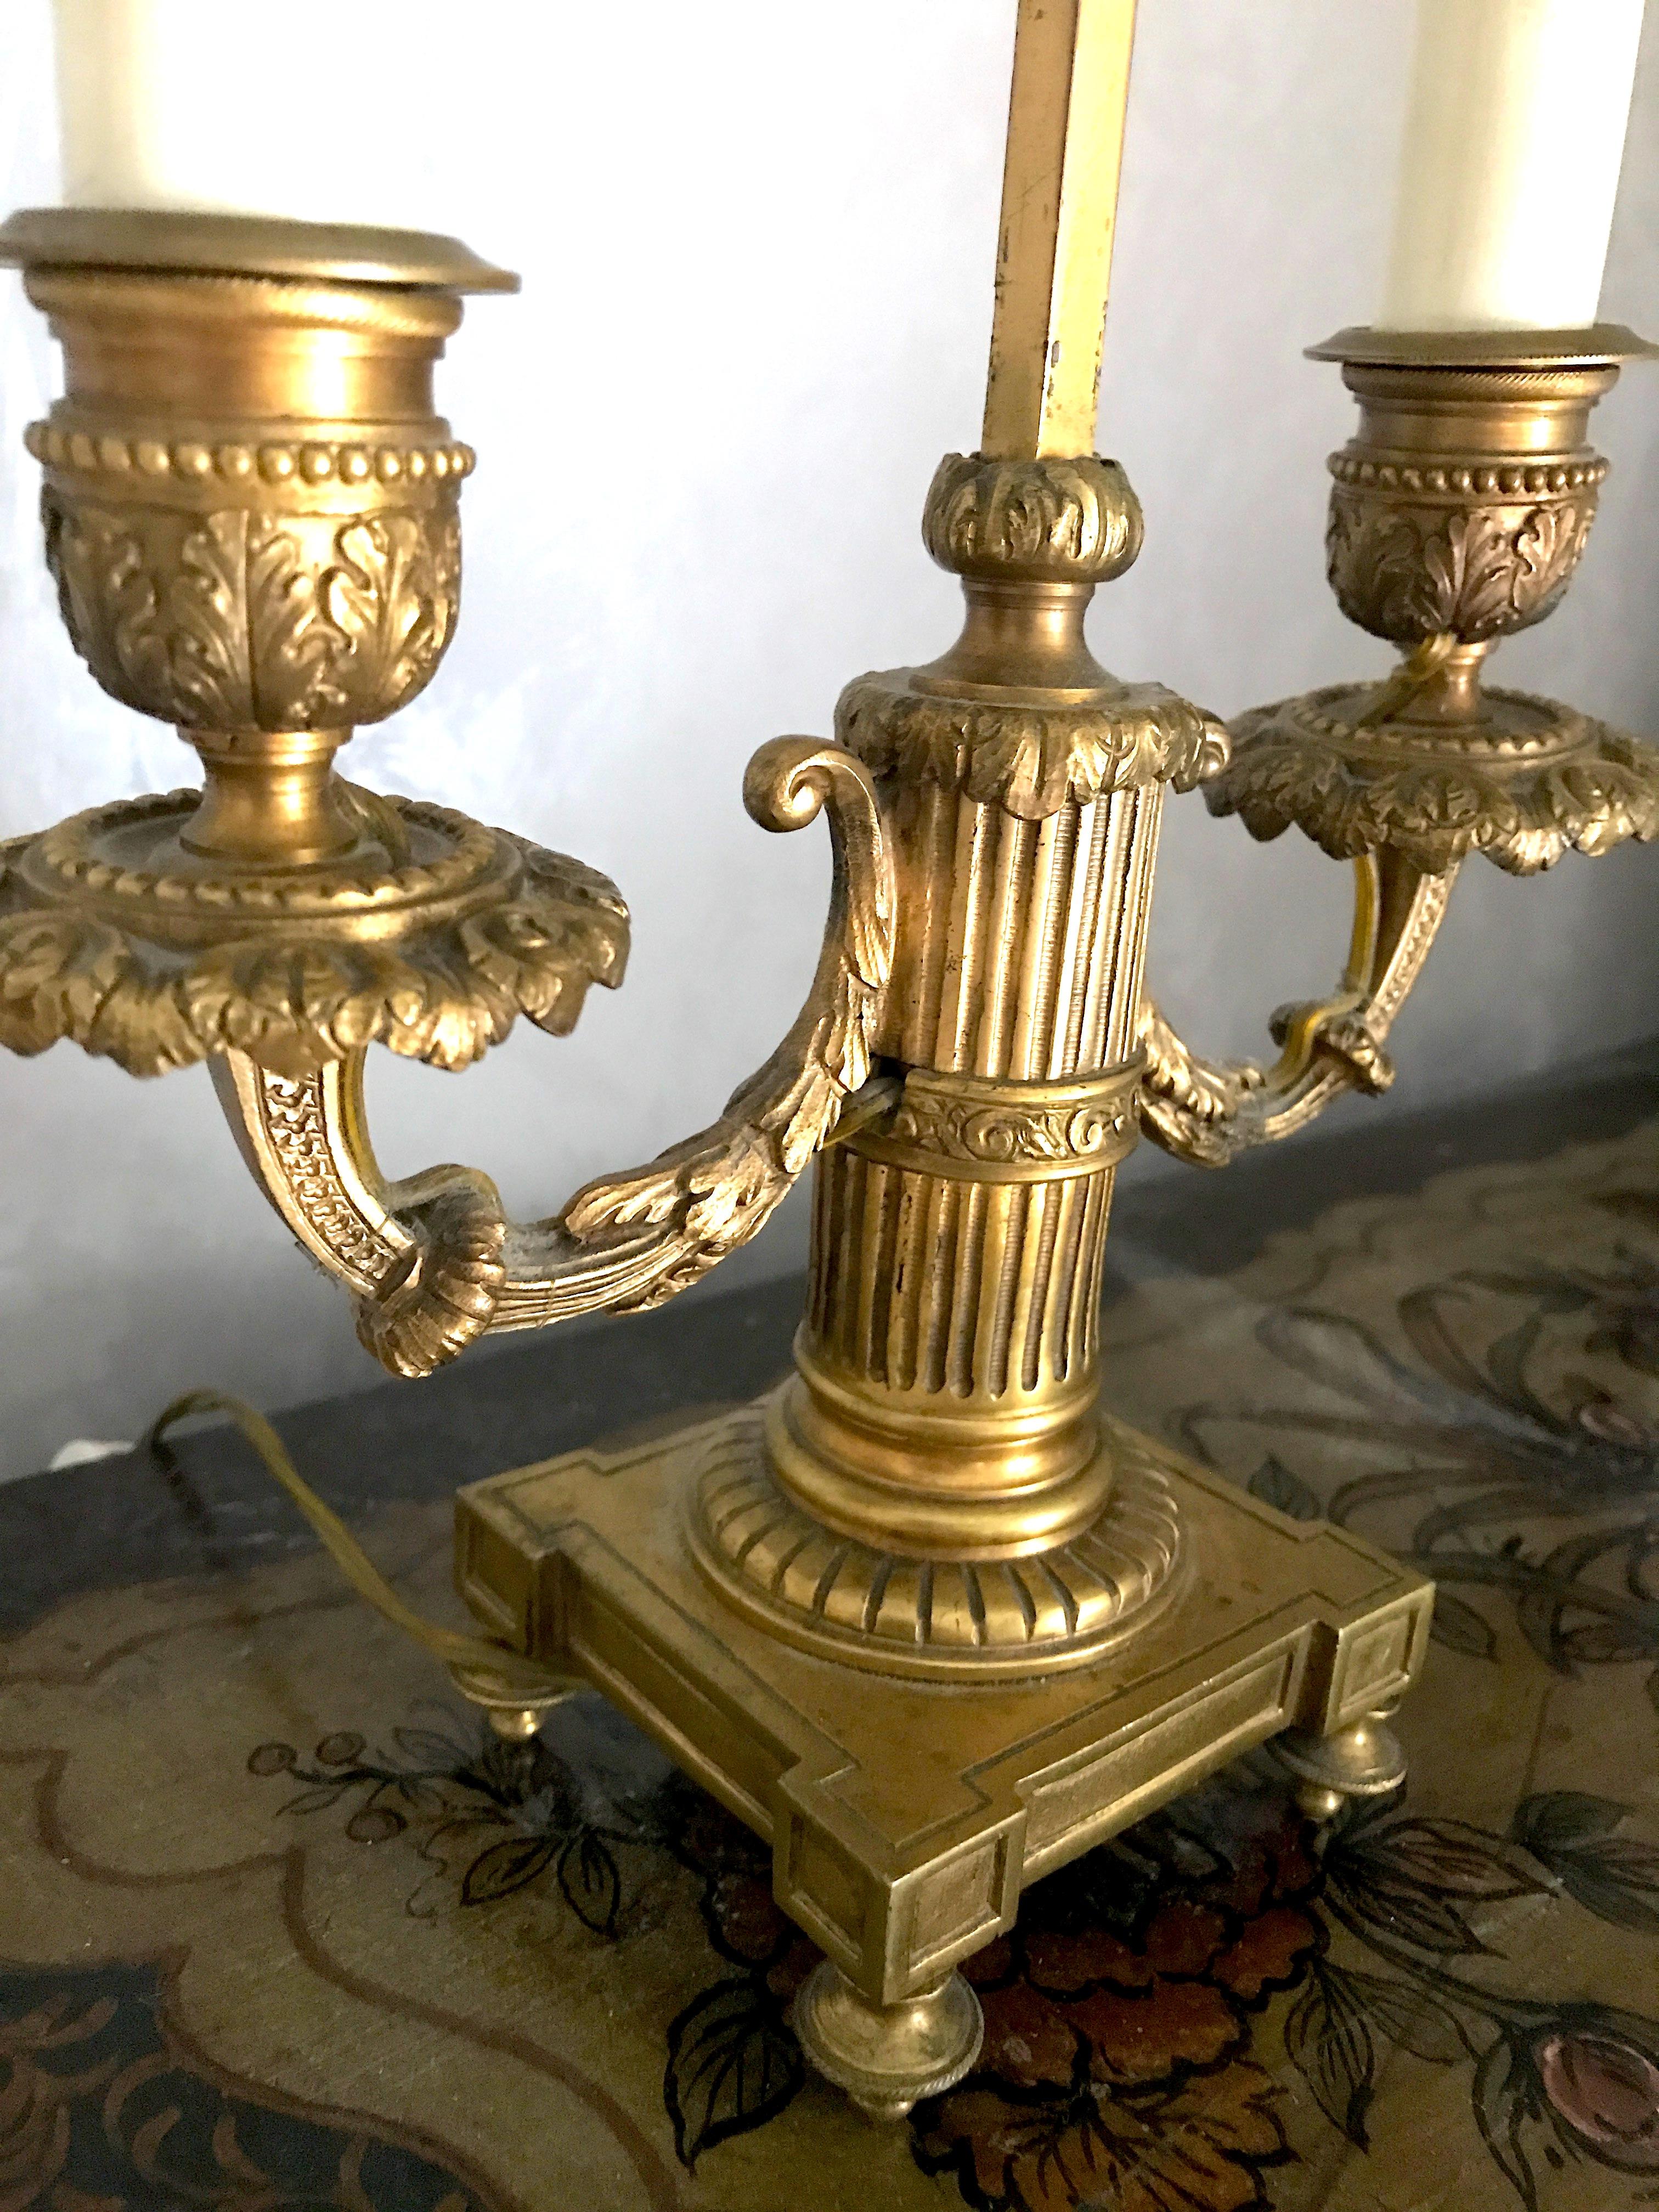 Pair of French Empire Gilt Bronze Two-Arm Bouillotte Lamps or Table Lamps, 1815 For Sale 2